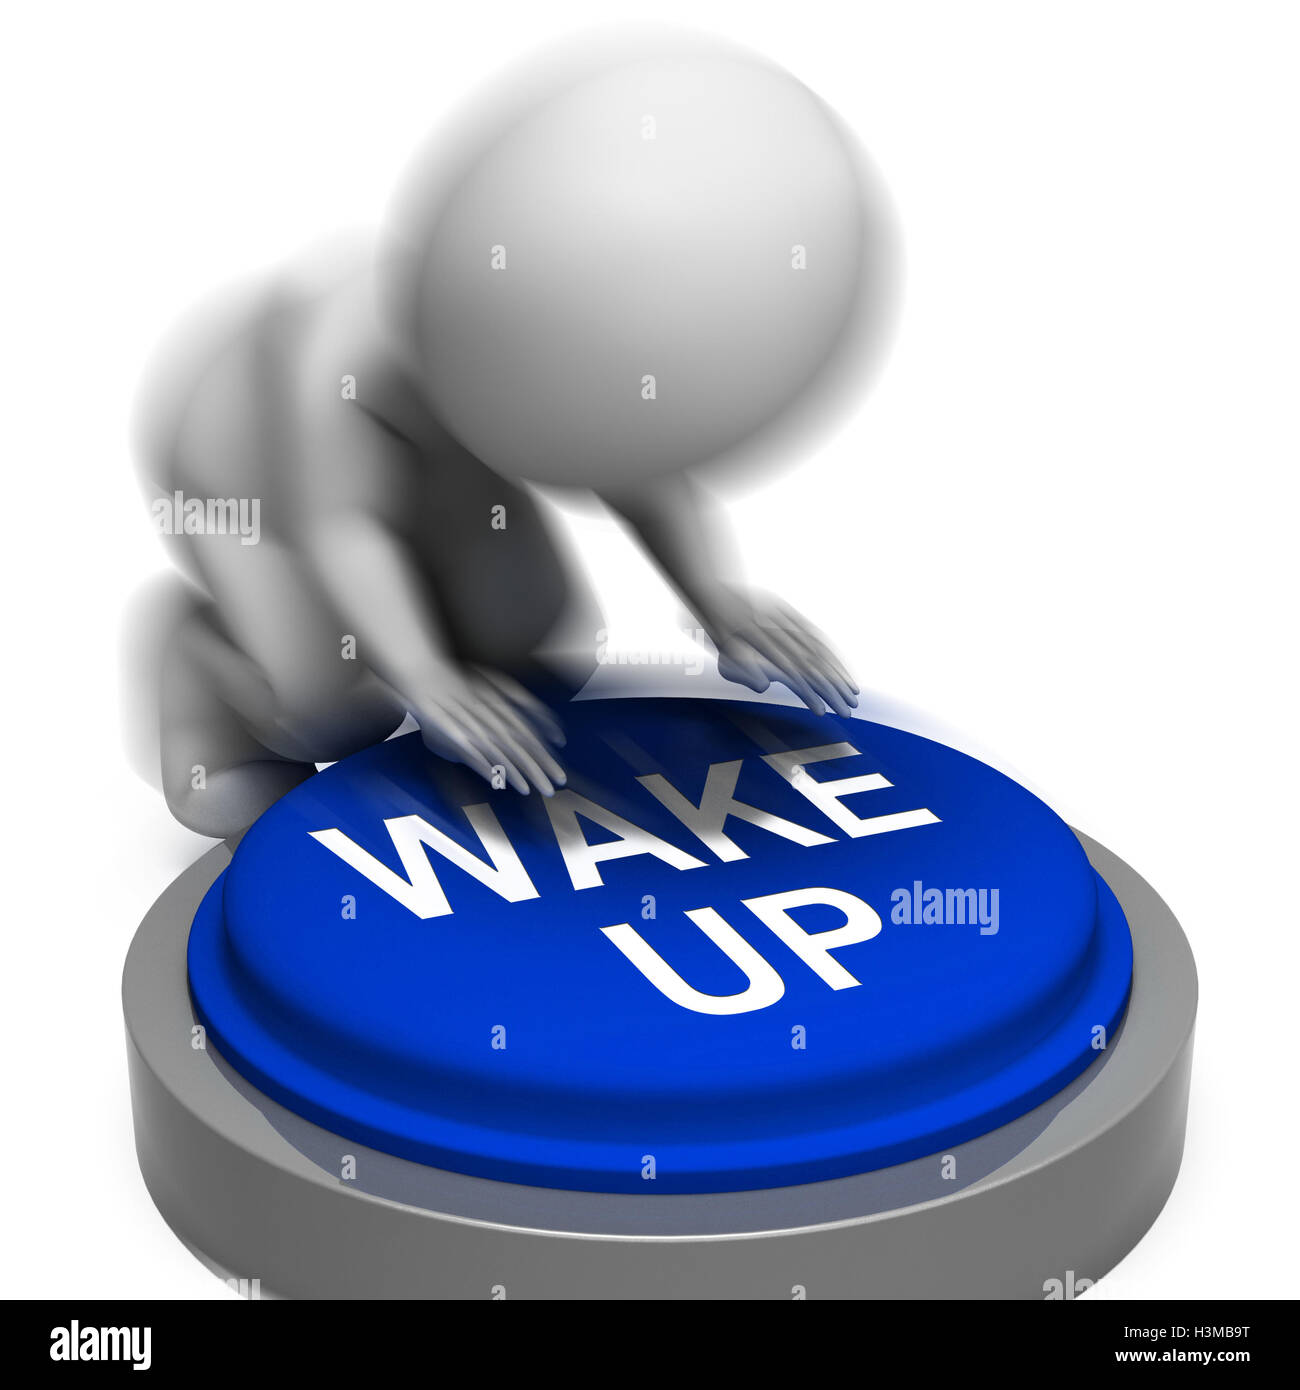 Wake Up Pressed Shows Alarm And Rising Stock Photo